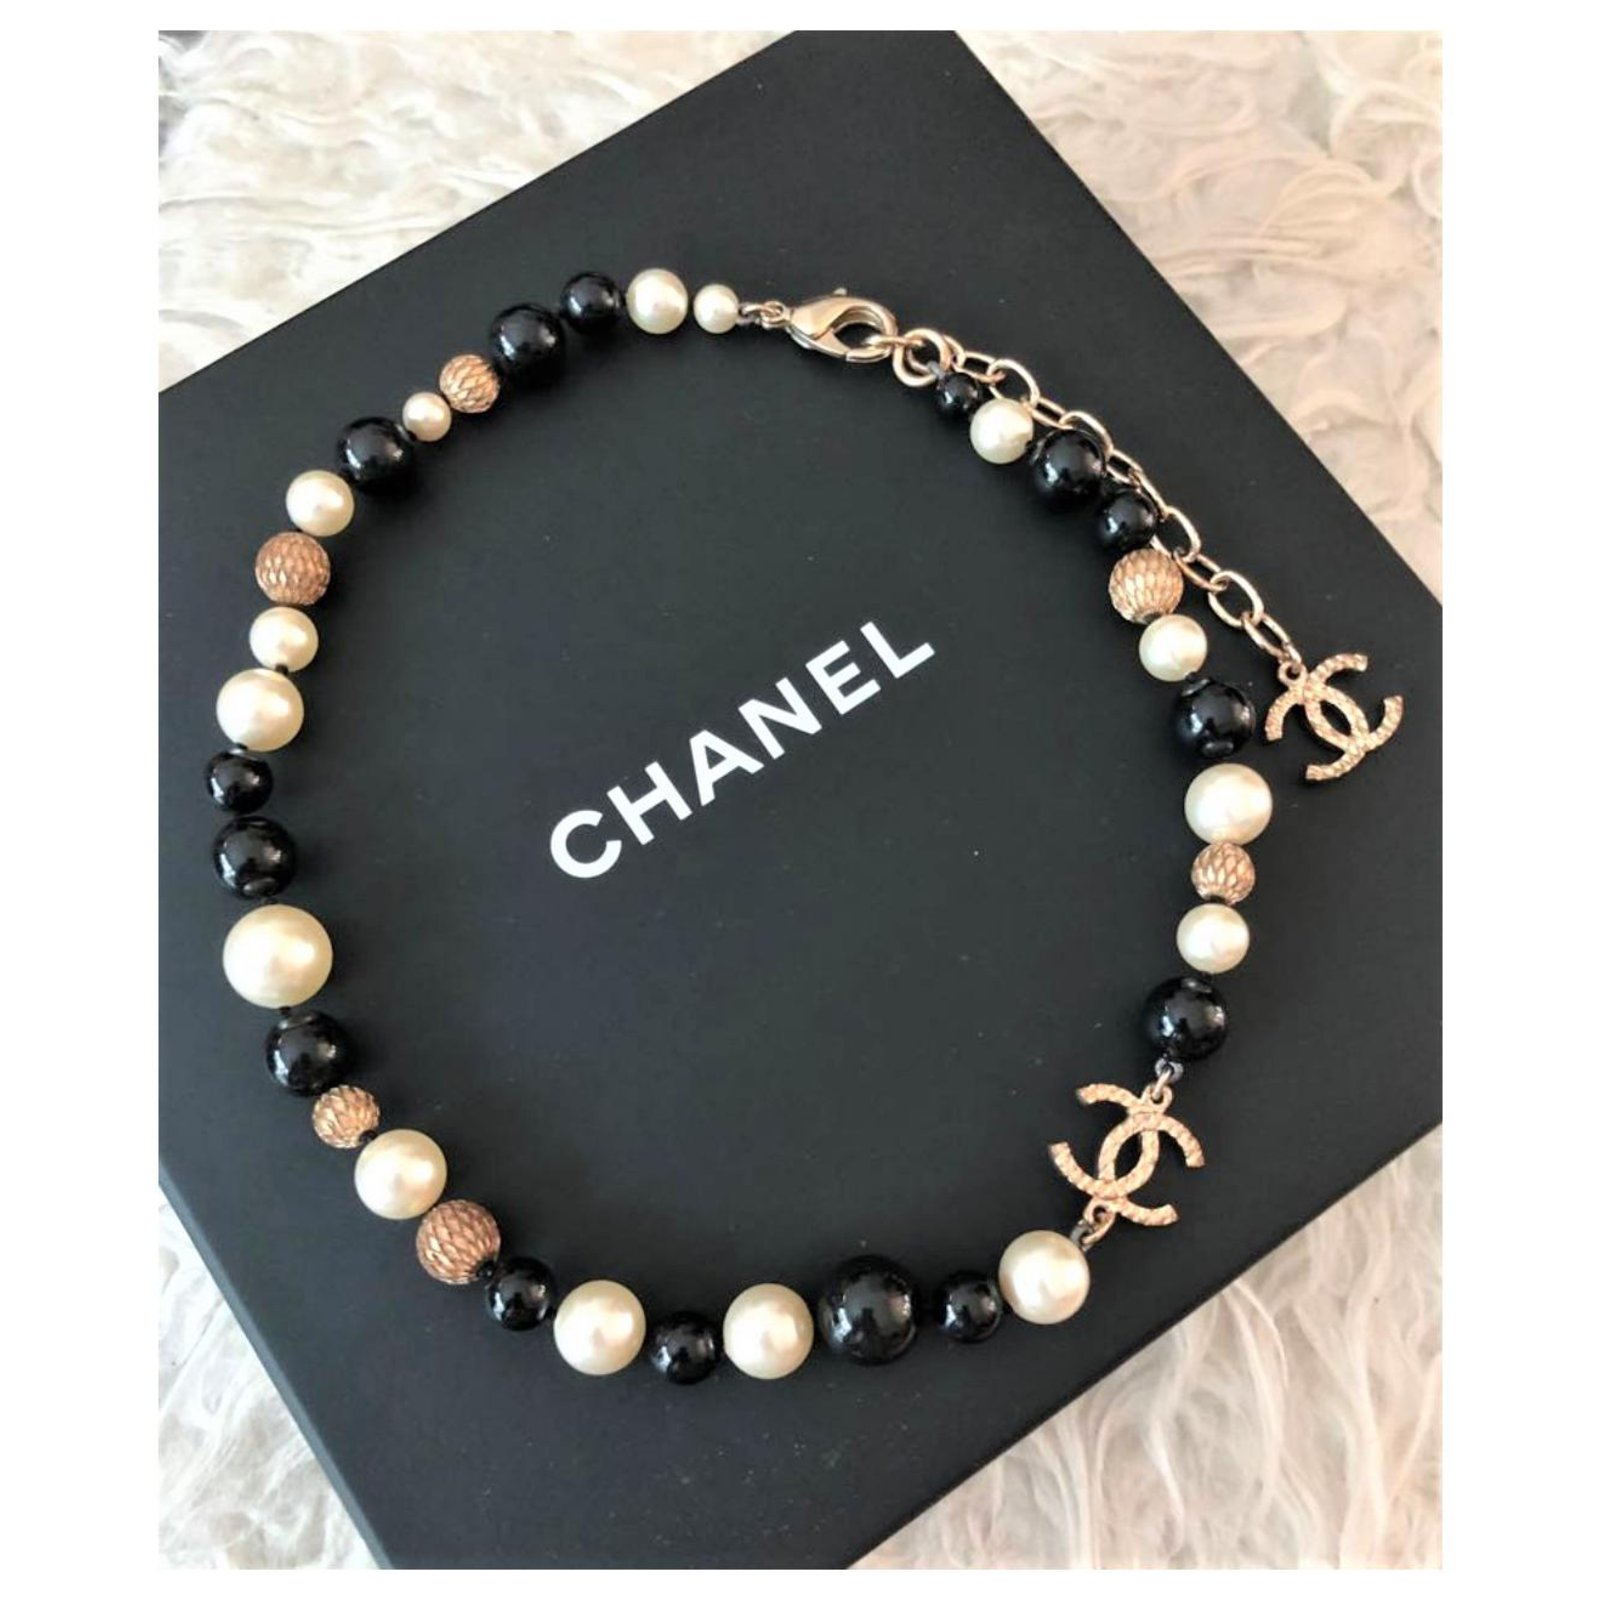 Chanel beads and pearl choker necklace